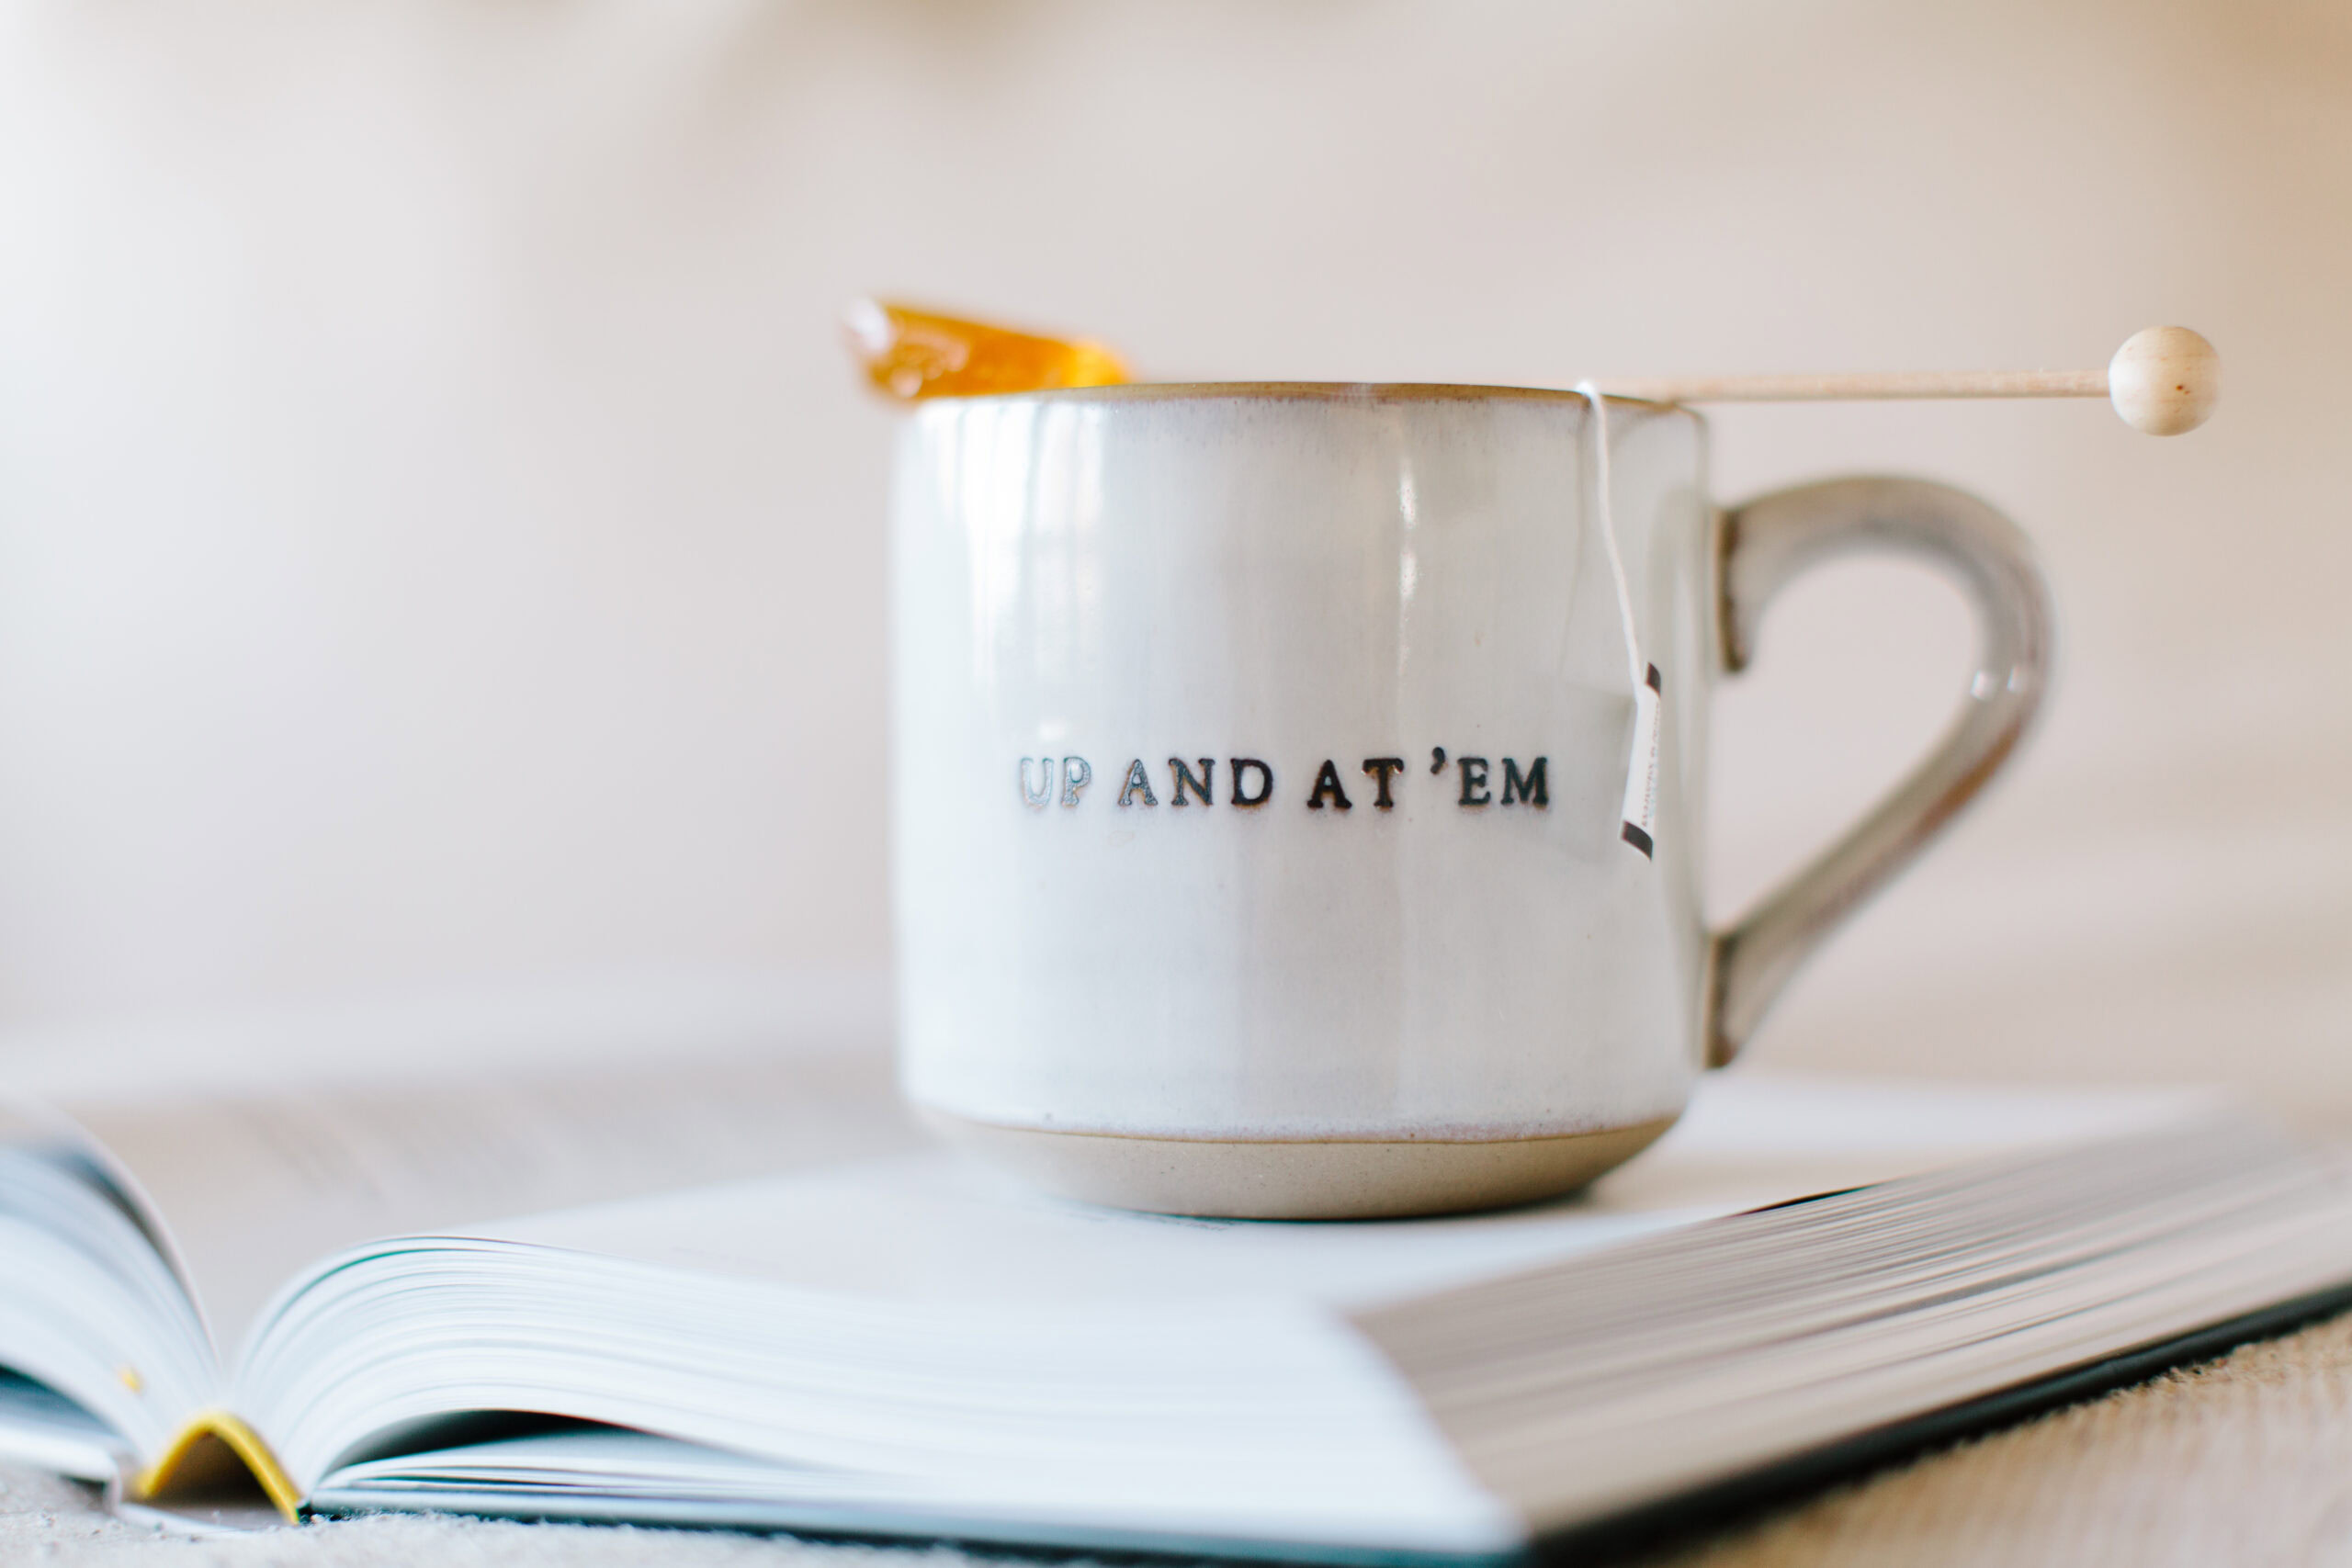 A white mug with "UP AND AT 'EM" on the side is placed on an open book. The mug contains a tea bag, and a honey dipper rests on its rim. Perfect for mornings spent building new friendships over a warm drink.